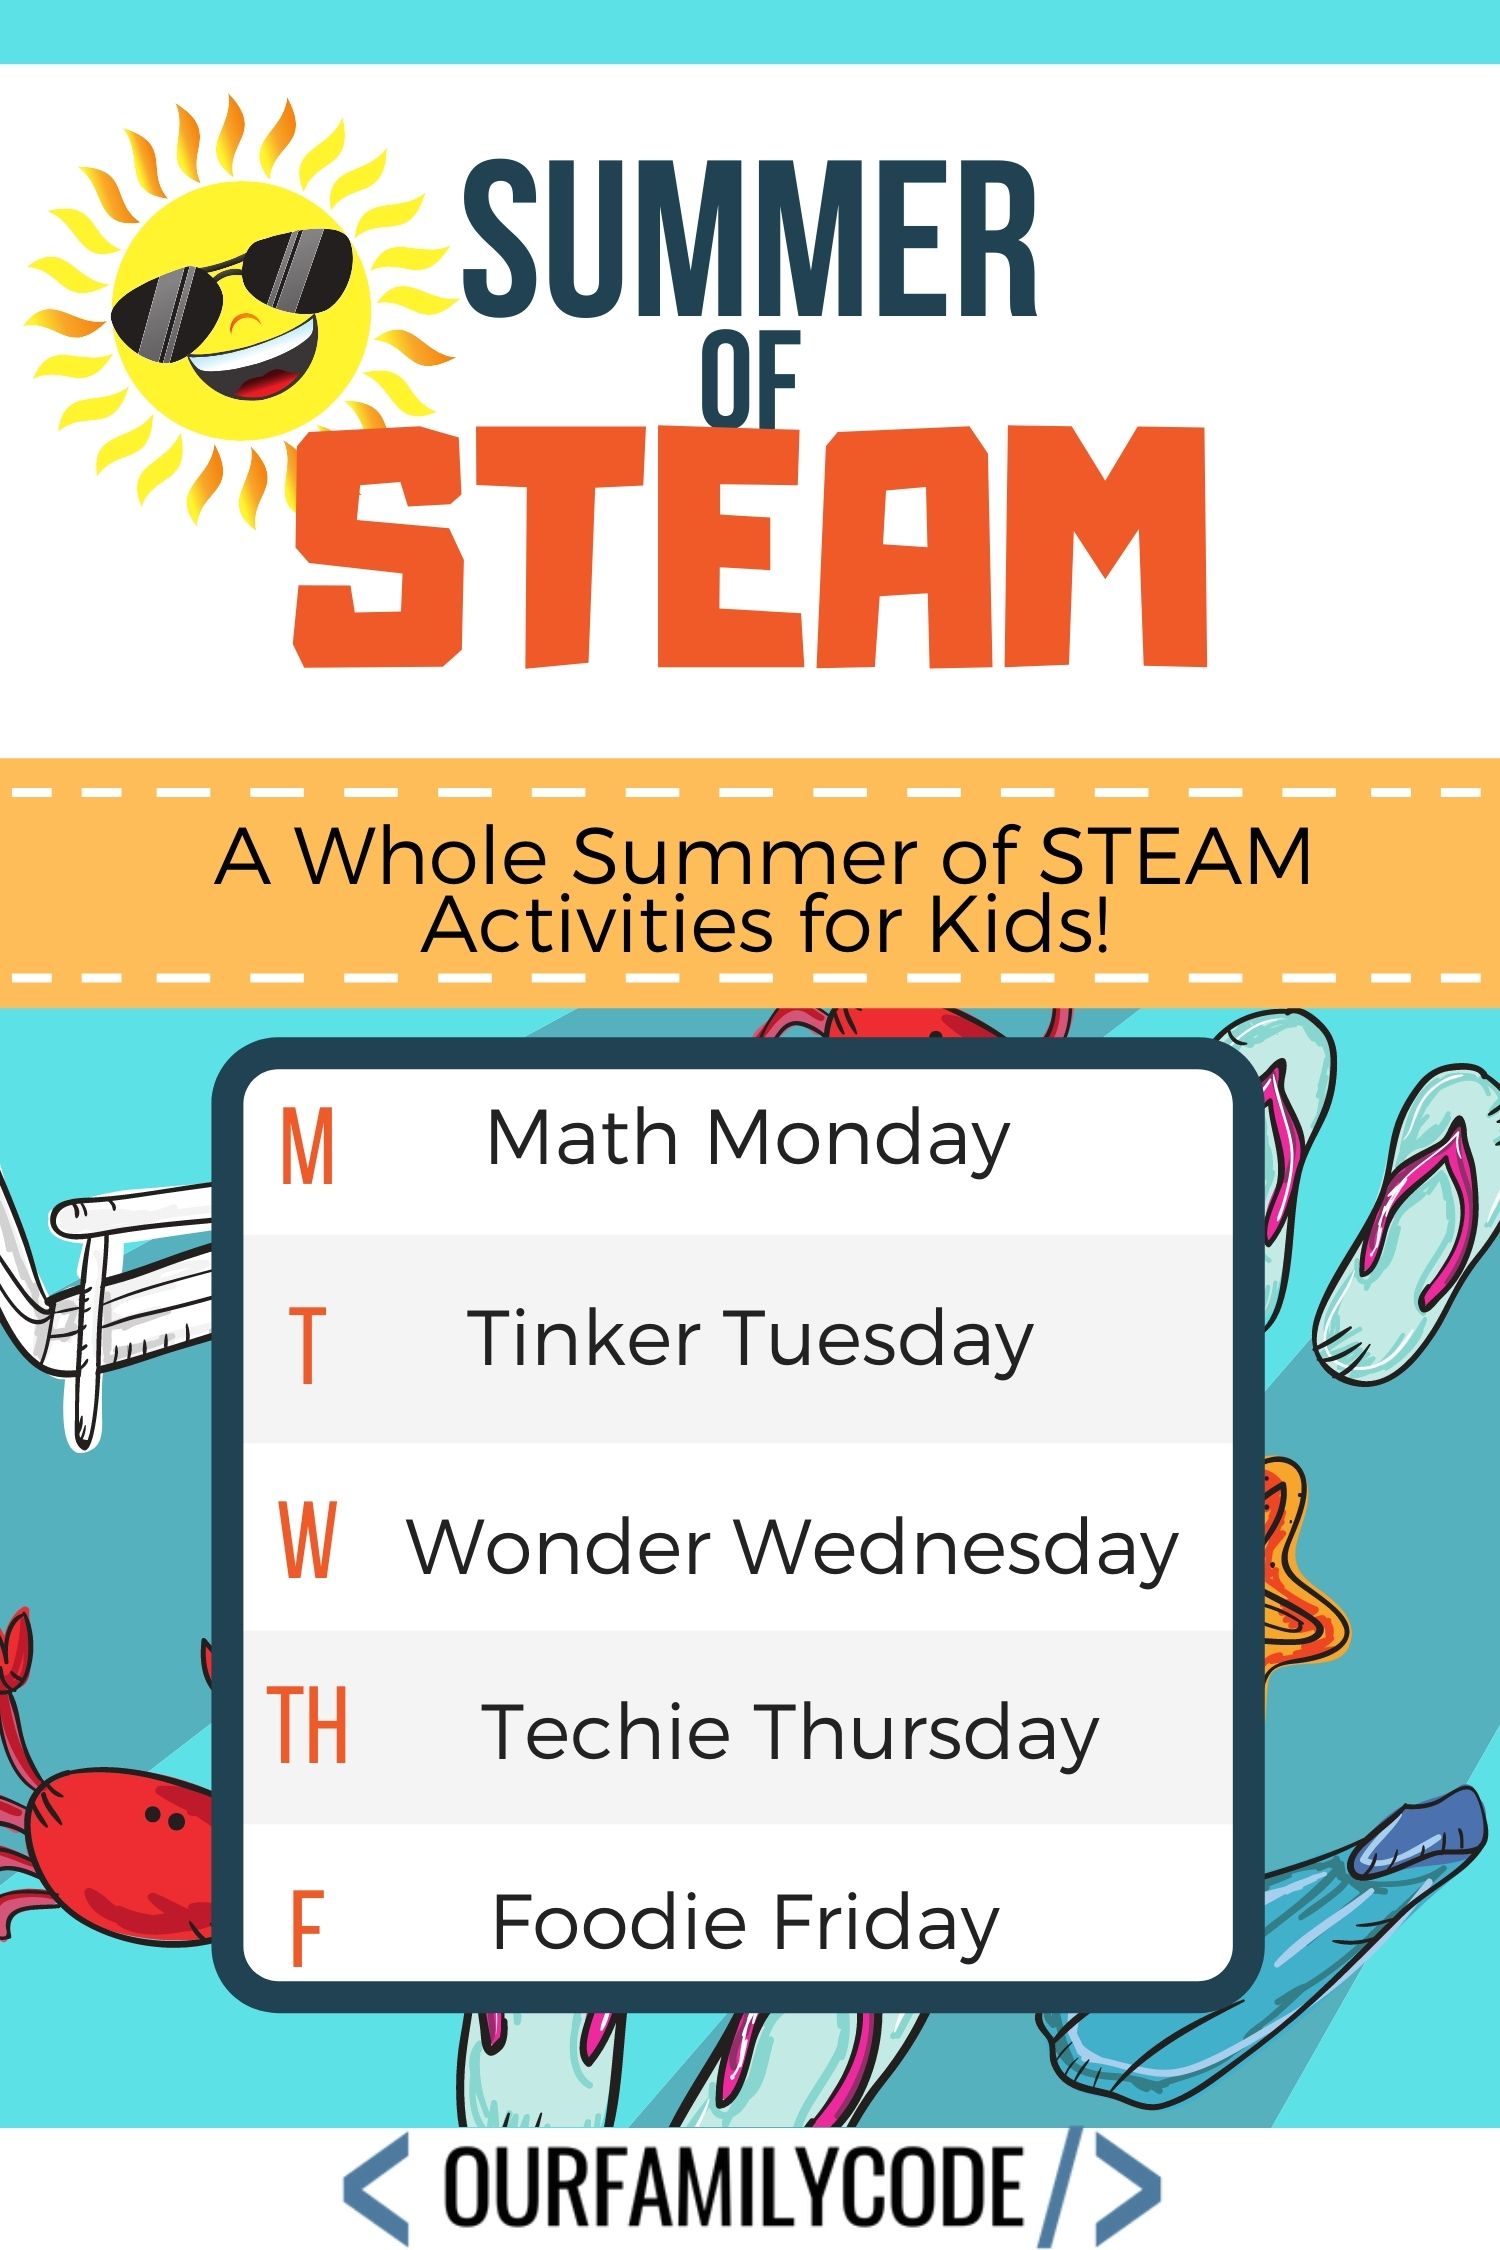 A picture of a Summer of STEAM schedule of STEAM activities for kids with Math Monday, Tinker Tuesday, Wonder Wednesday, Techie Thursday, and Foodie Friday.